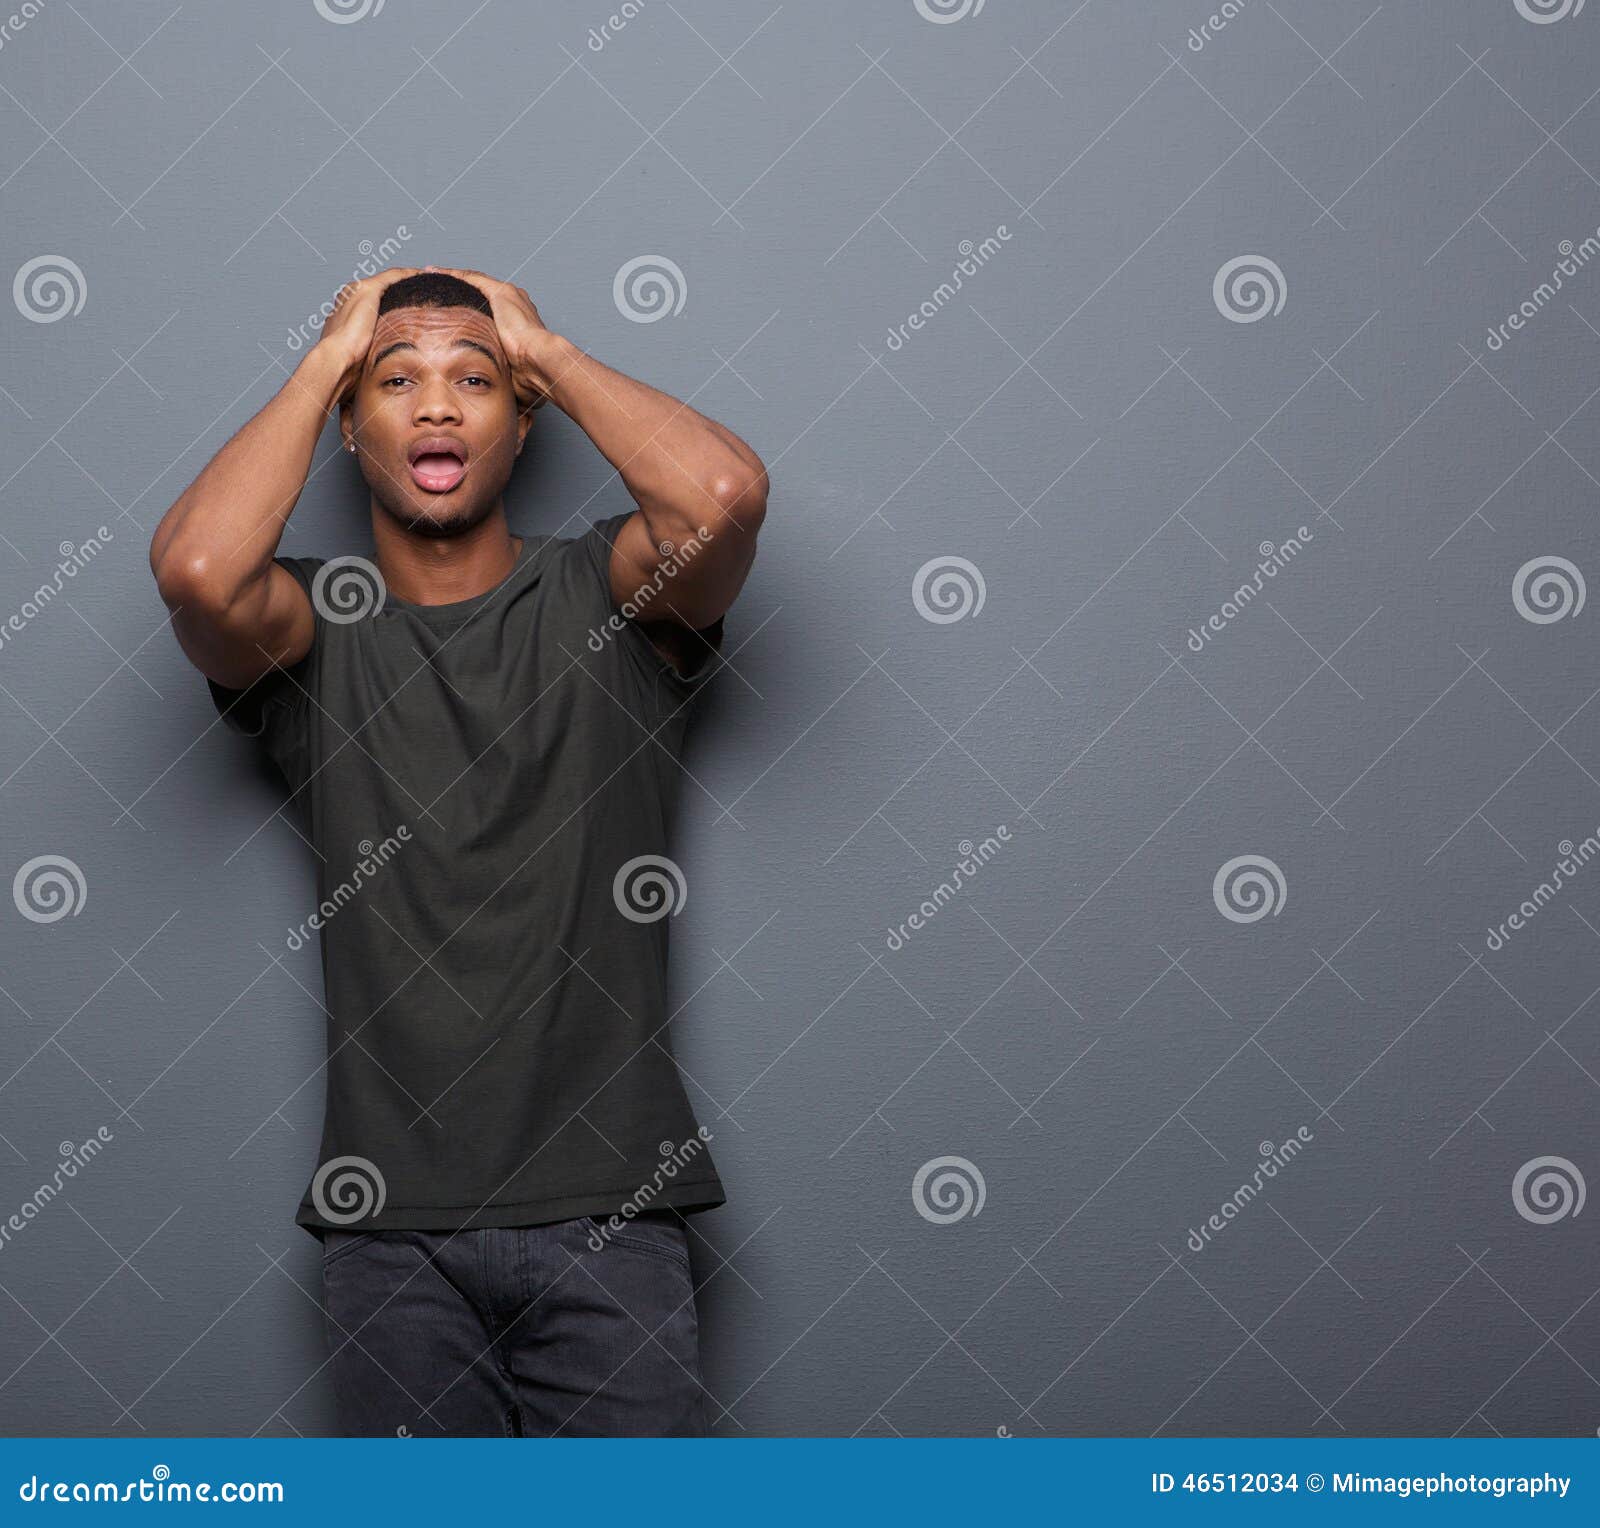 Surprised Man with Hands on Head Stock Photo - Image of adult, handsome ...